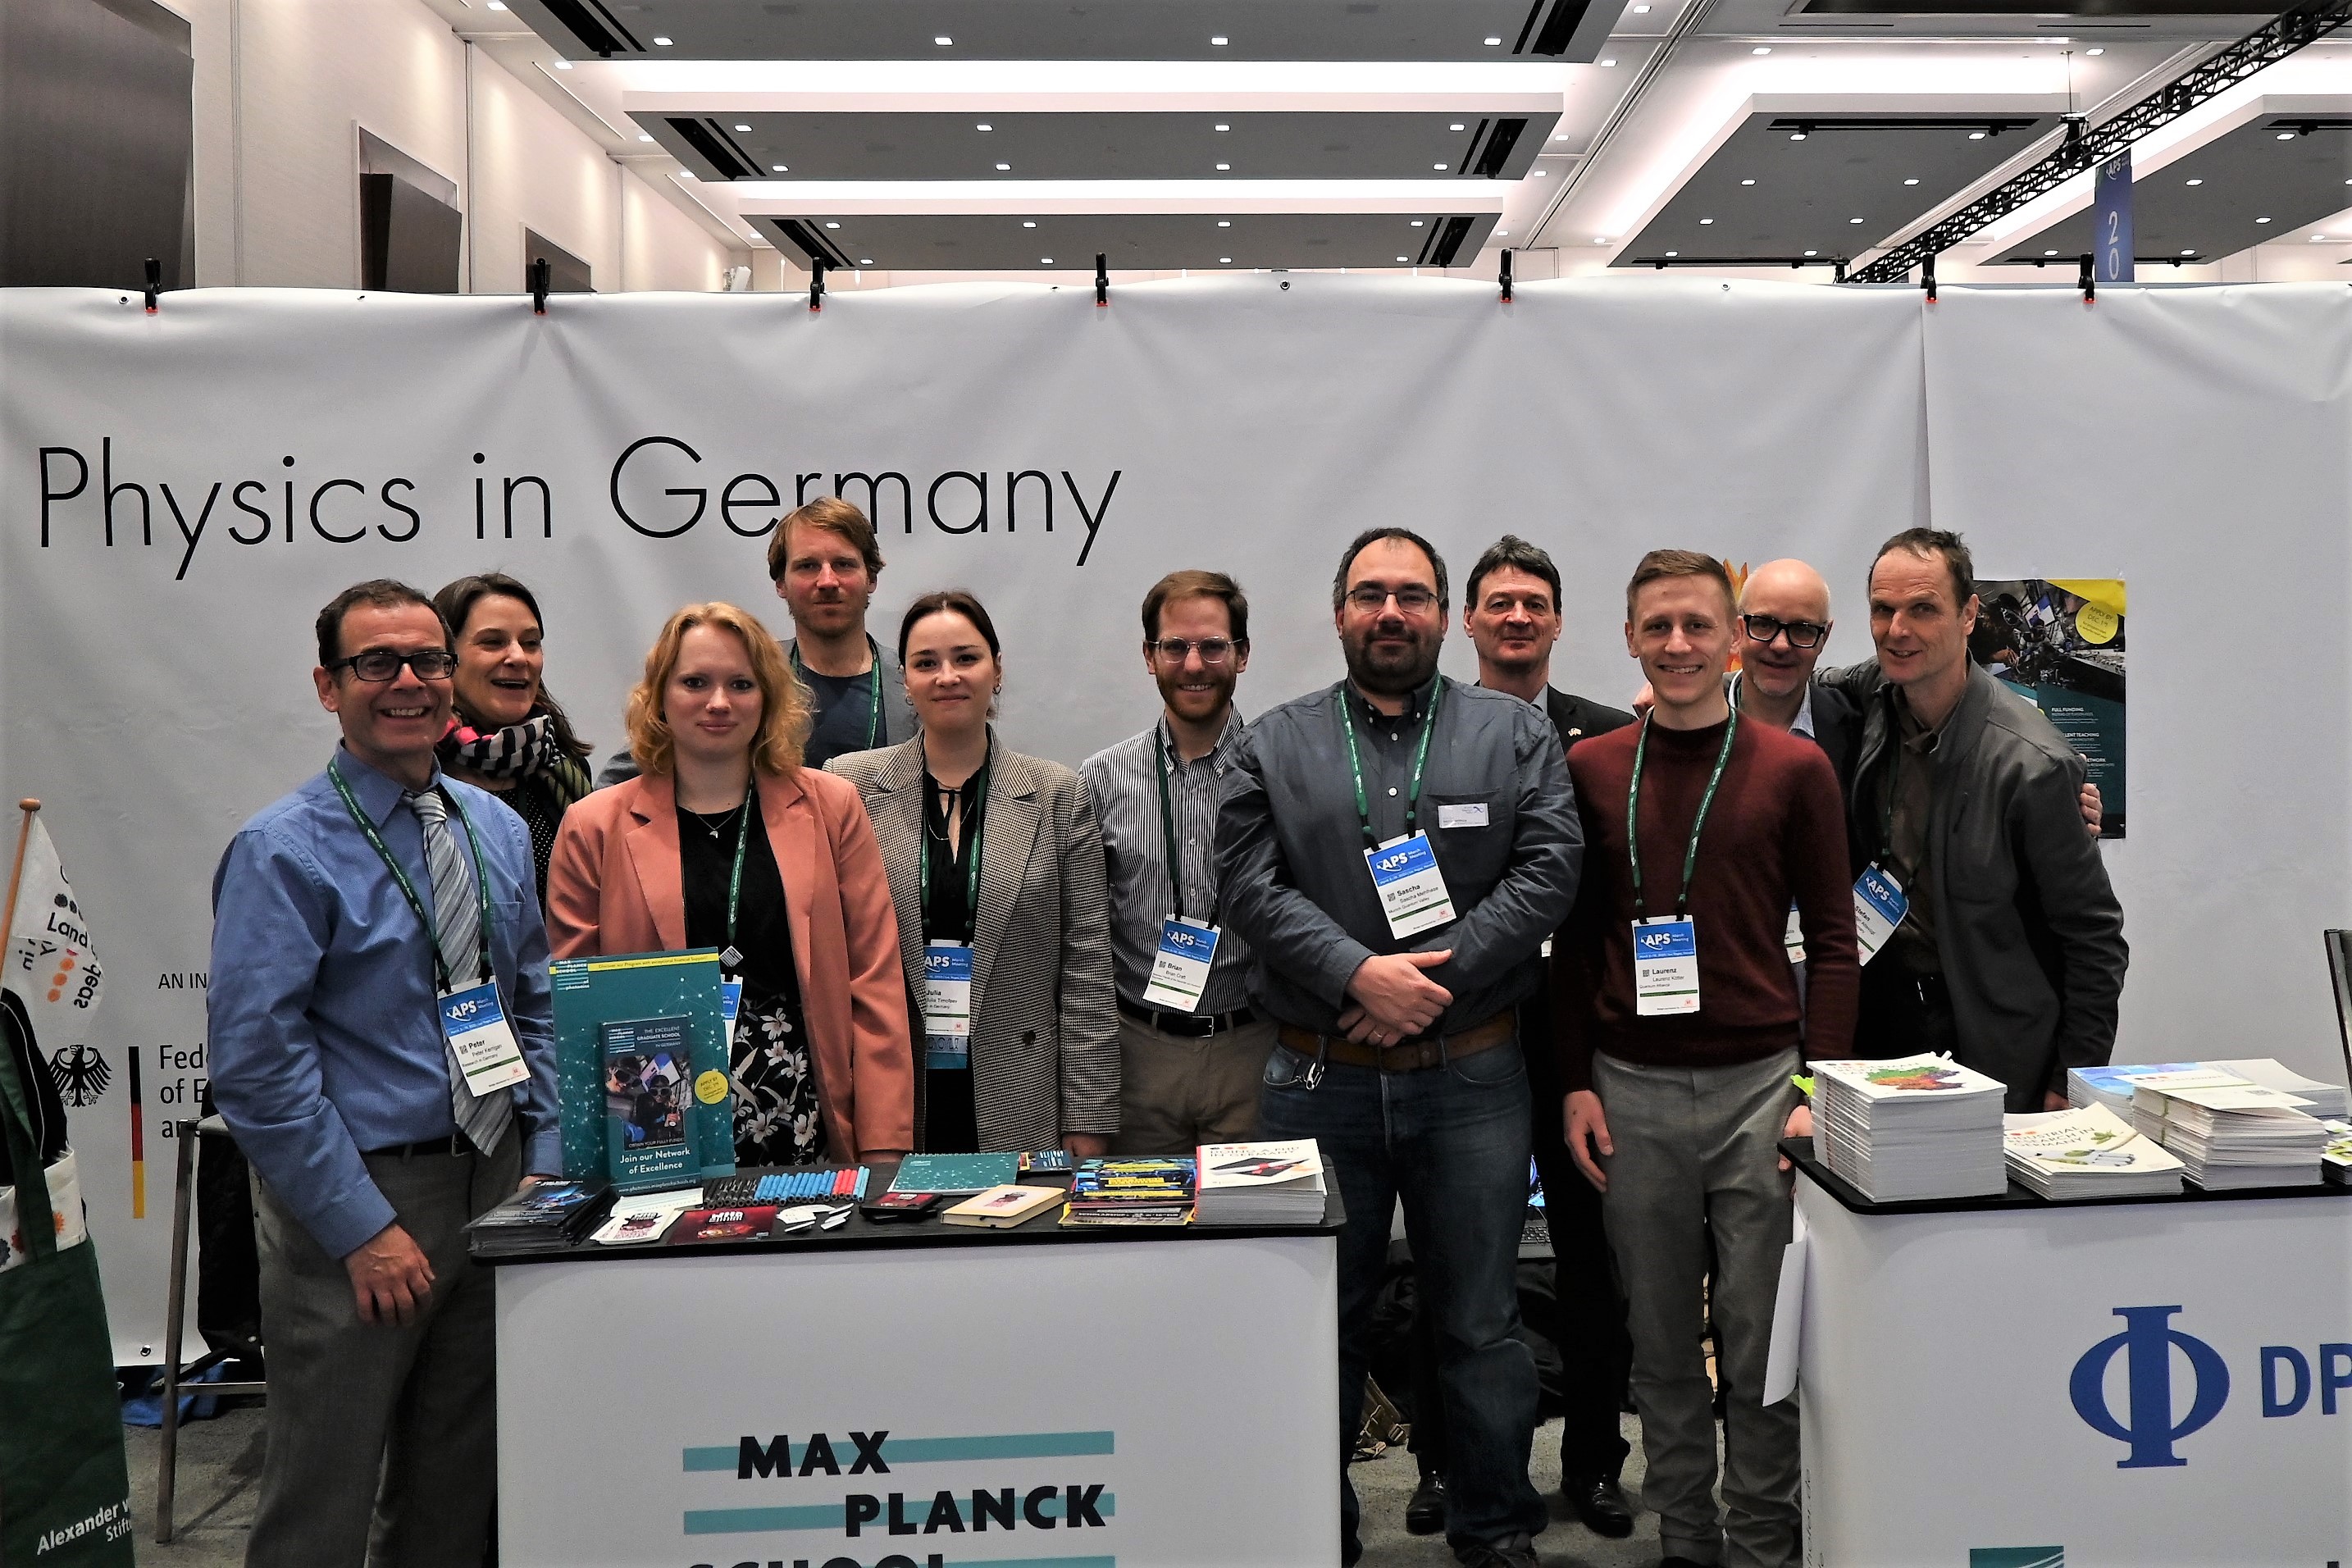 The team at the Research in Germany information booth was pleased to welcome international early-career researchers